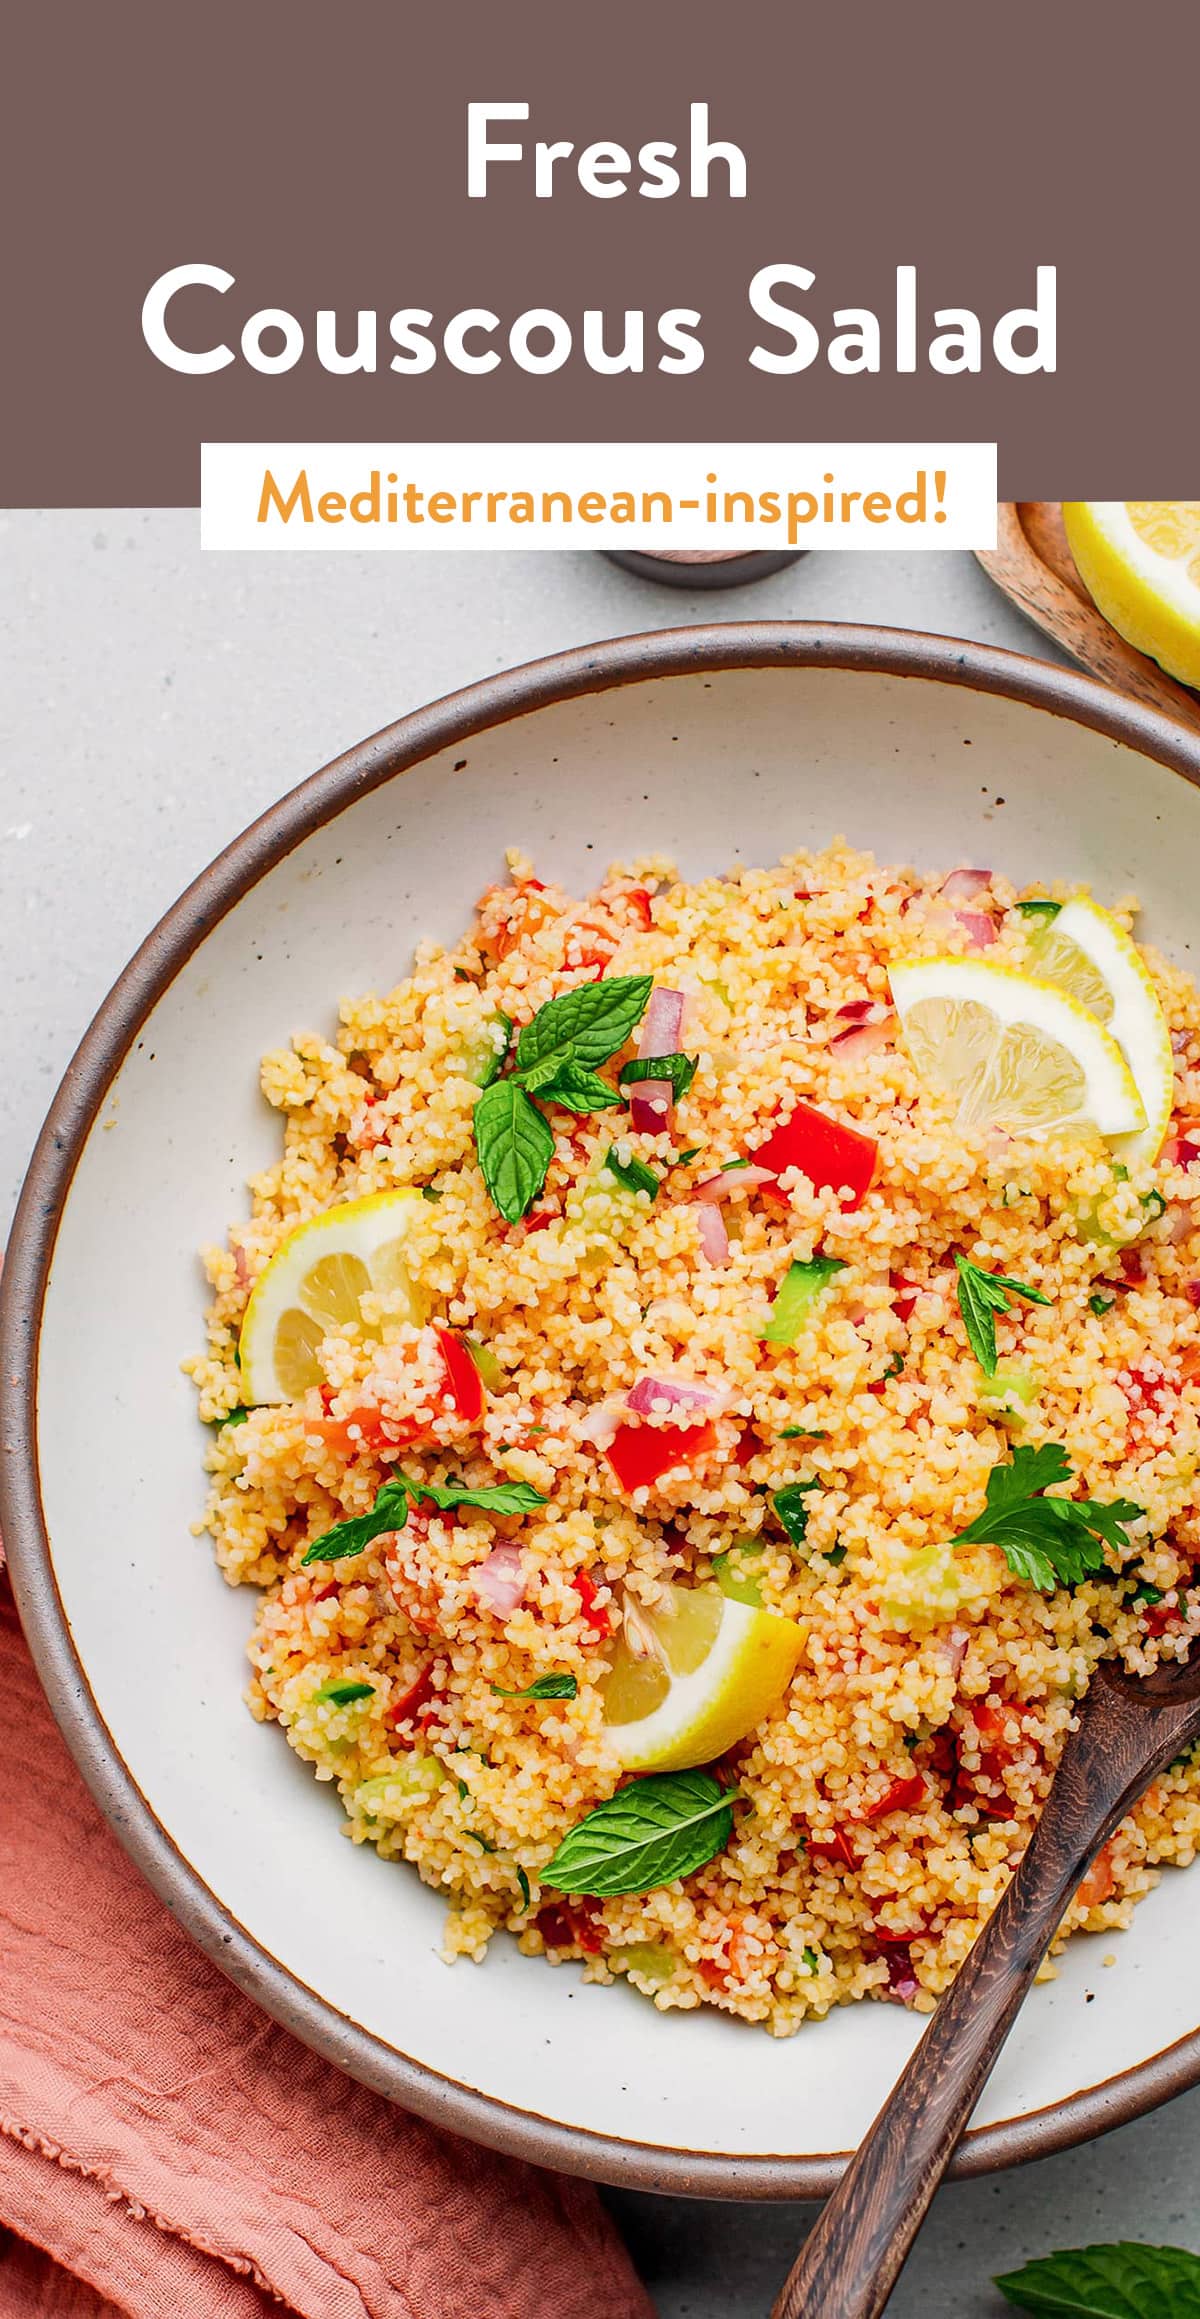 This simple Mediterranean-inspired couscous salad packs plenty of fresh vegetables like juicy tomatoes, crisp cucumber, and red onions. It is then infused with fresh herbs and tossed in a bright and zesty lemon dressing. Just 15 minutes of prep time! #couscous #salad